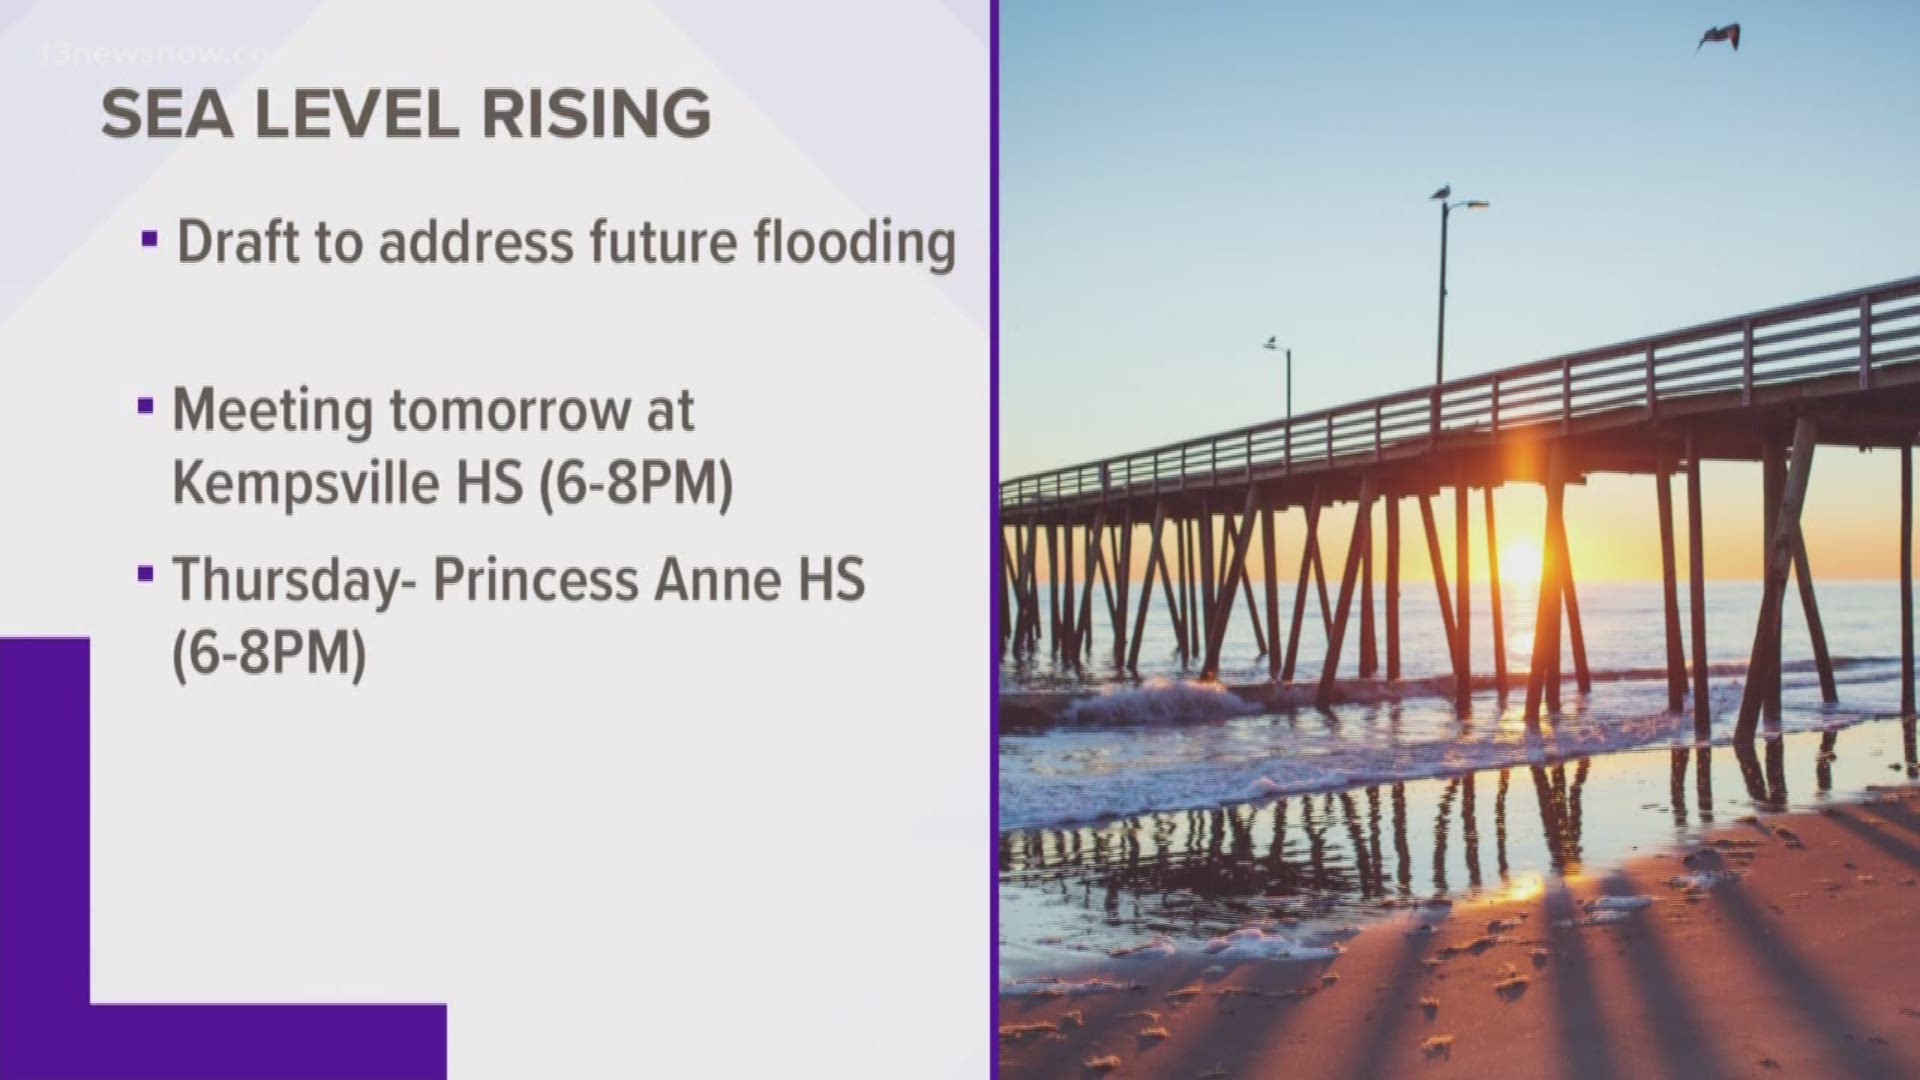 With sea level rising around Hampton Roads, Virginia Beach is meeting to get ready for future flood risks.